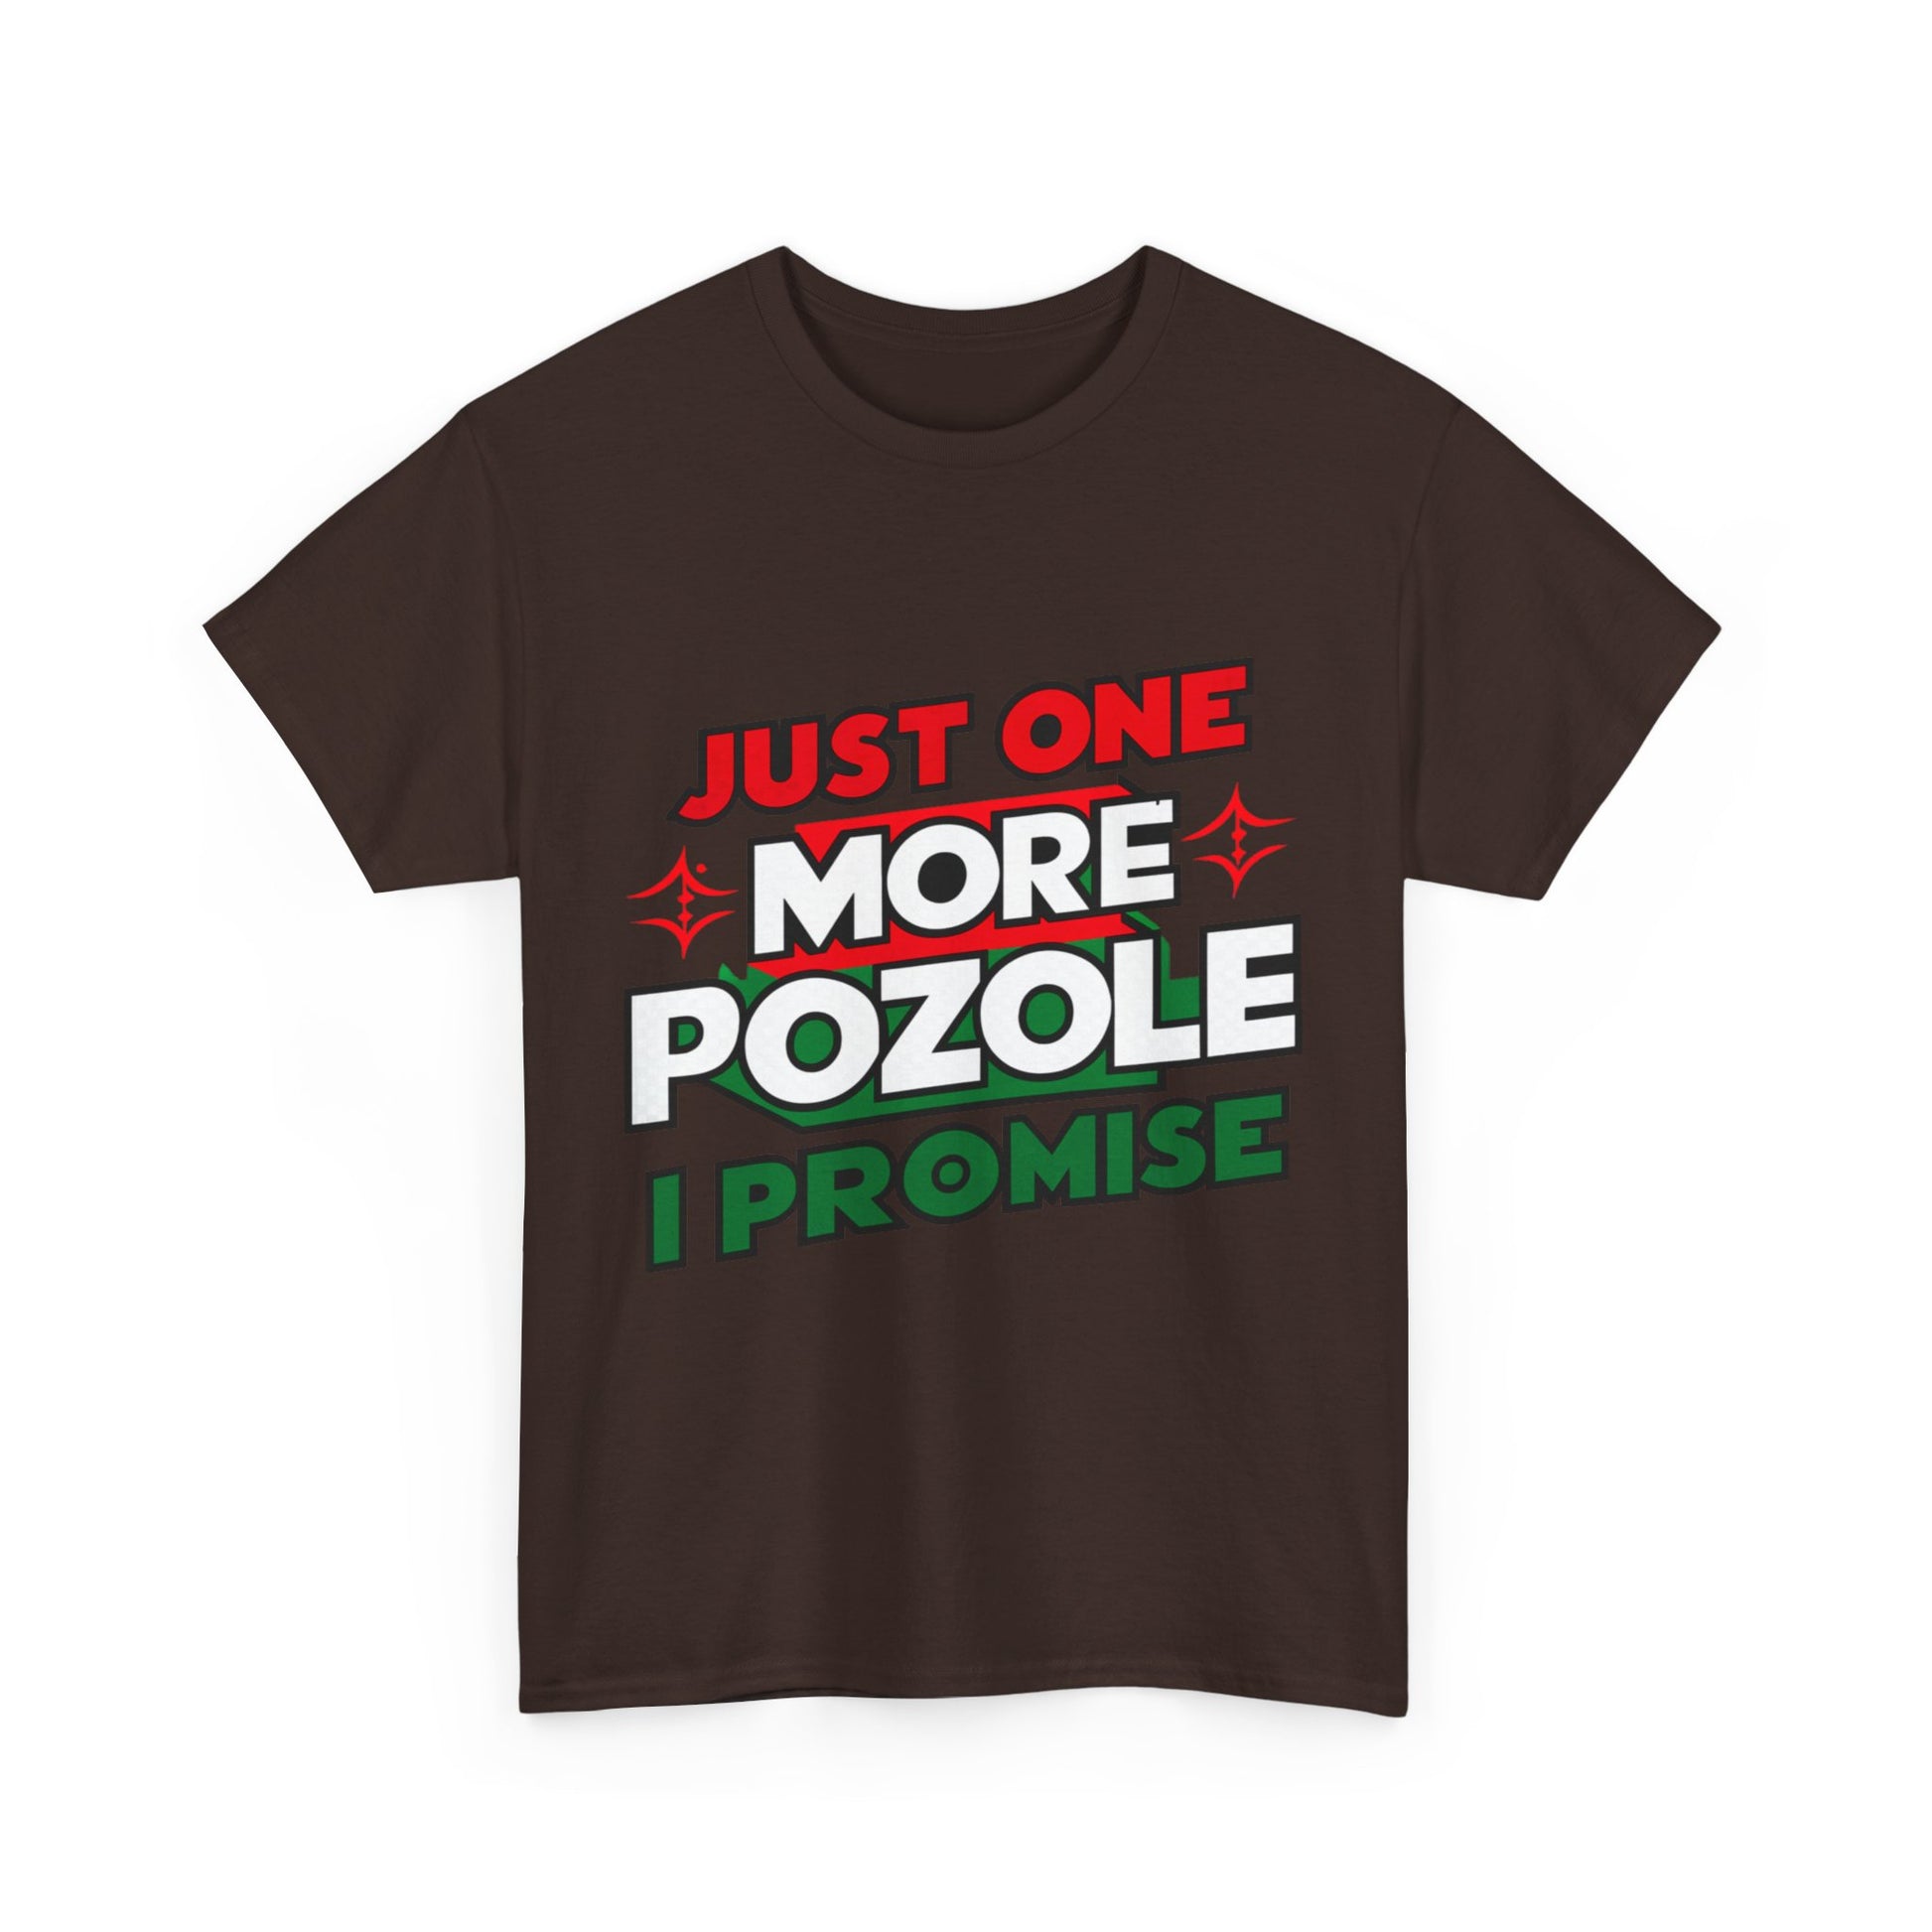 Just One More Pozole I Promise Mexican Food Graphic Unisex Heavy Cotton Tee Cotton Funny Humorous Graphic Soft Premium Unisex Men Women Dark Chocolate T-shirt Birthday Gift-21